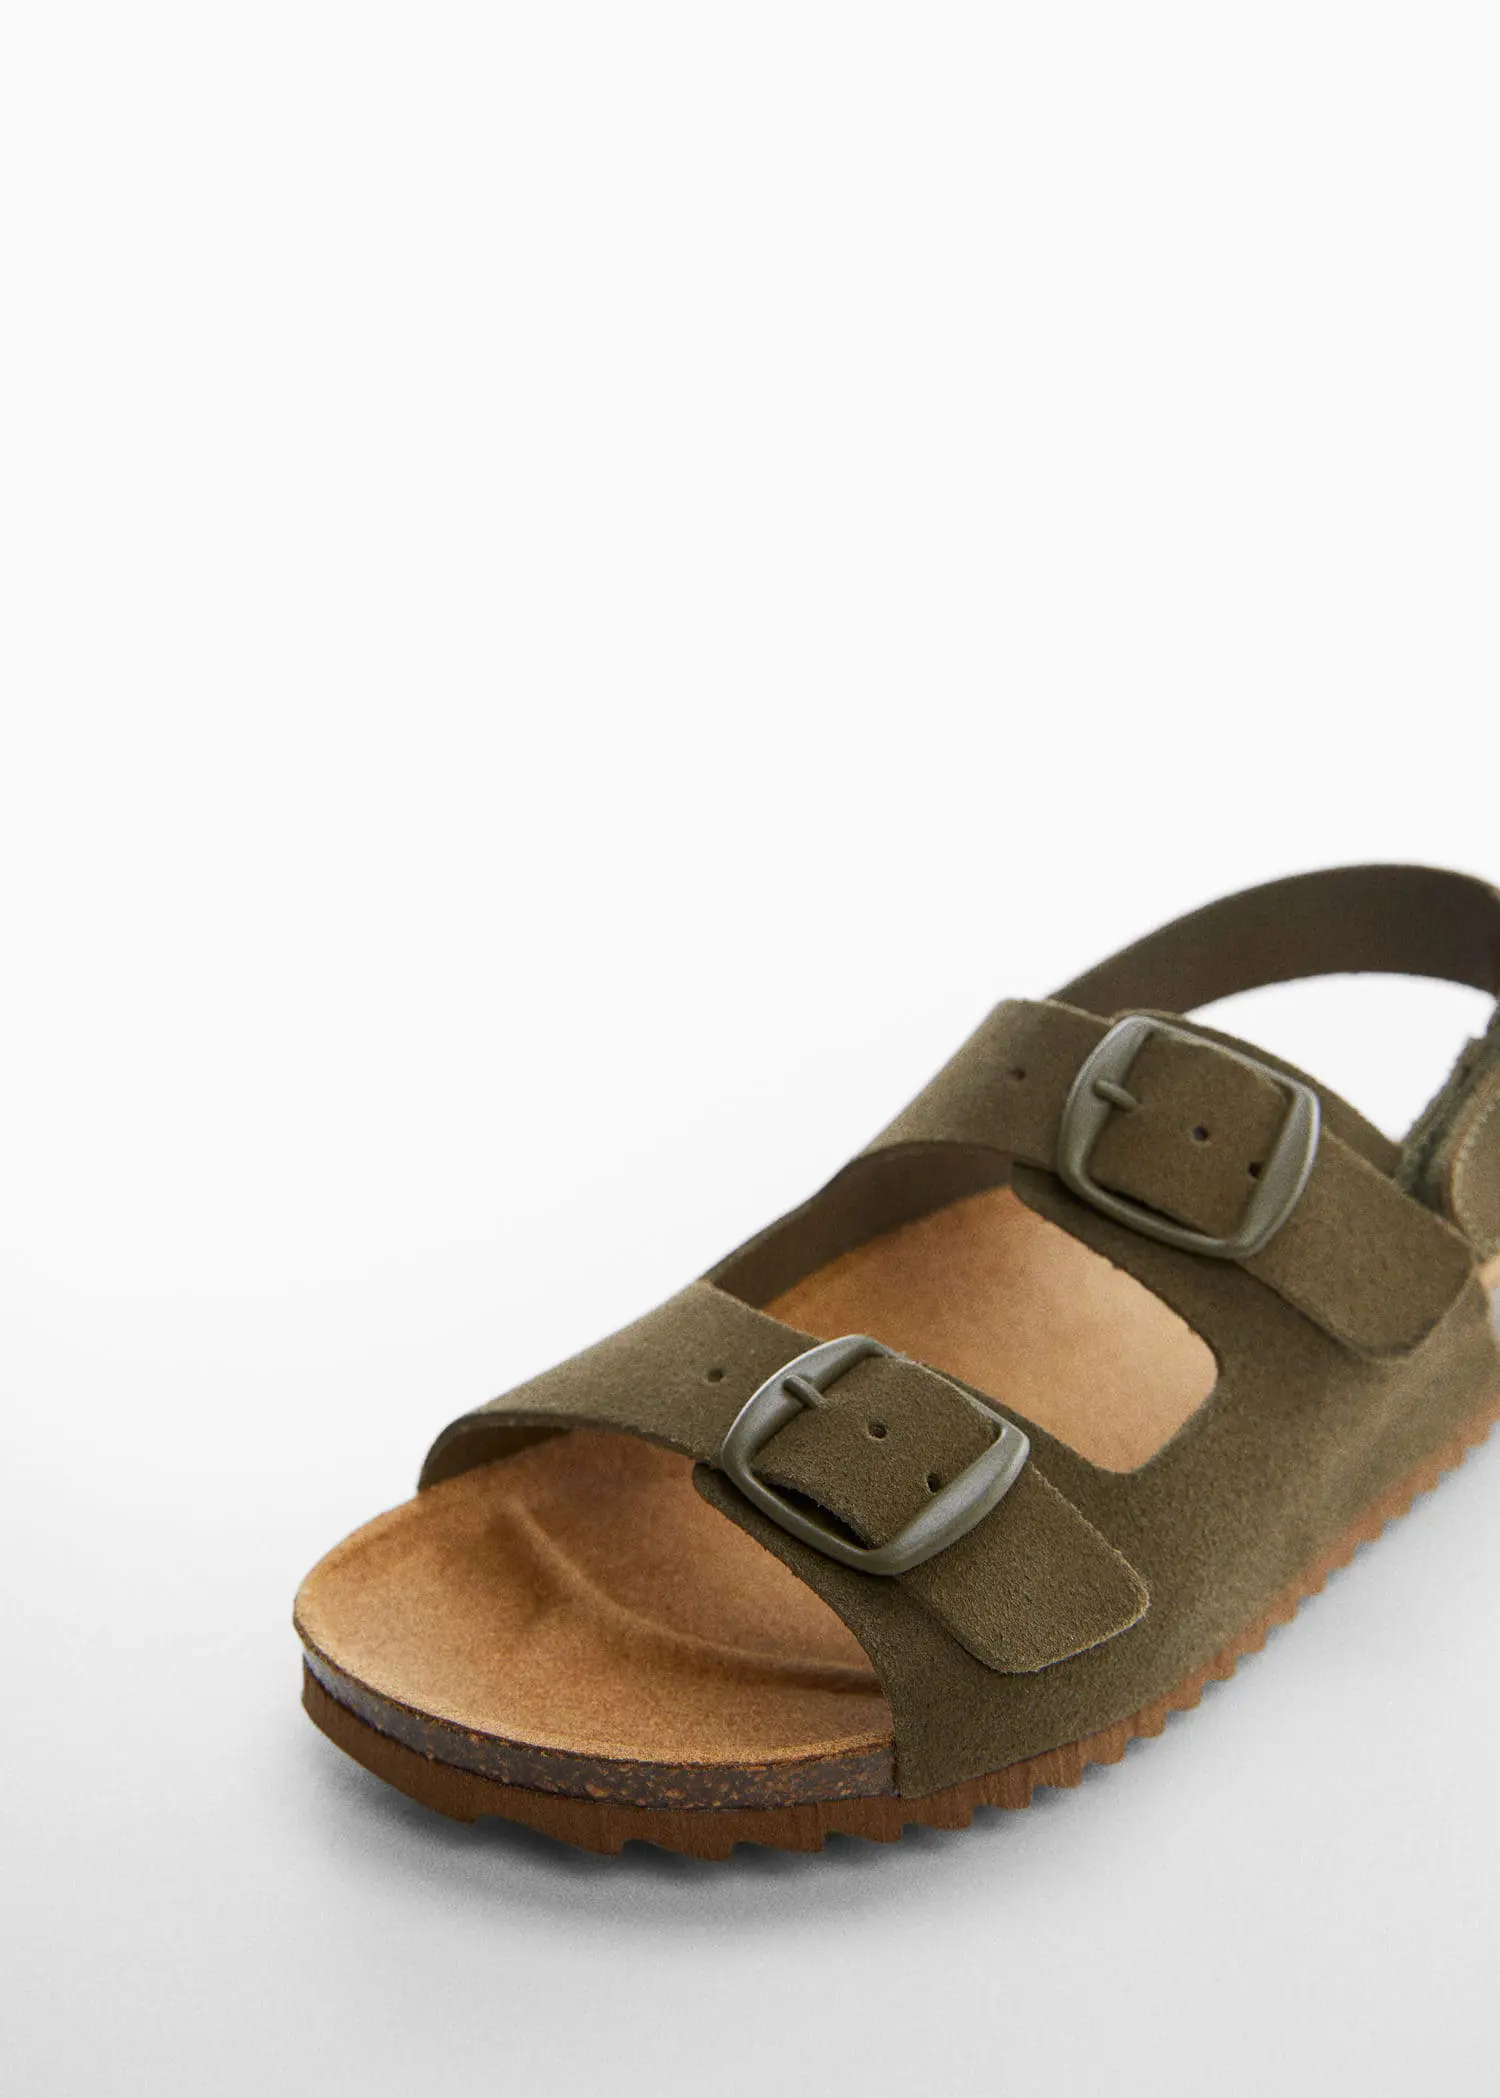 Mango Buckles leather sandal. a close up of a pair of sandals on the ground 